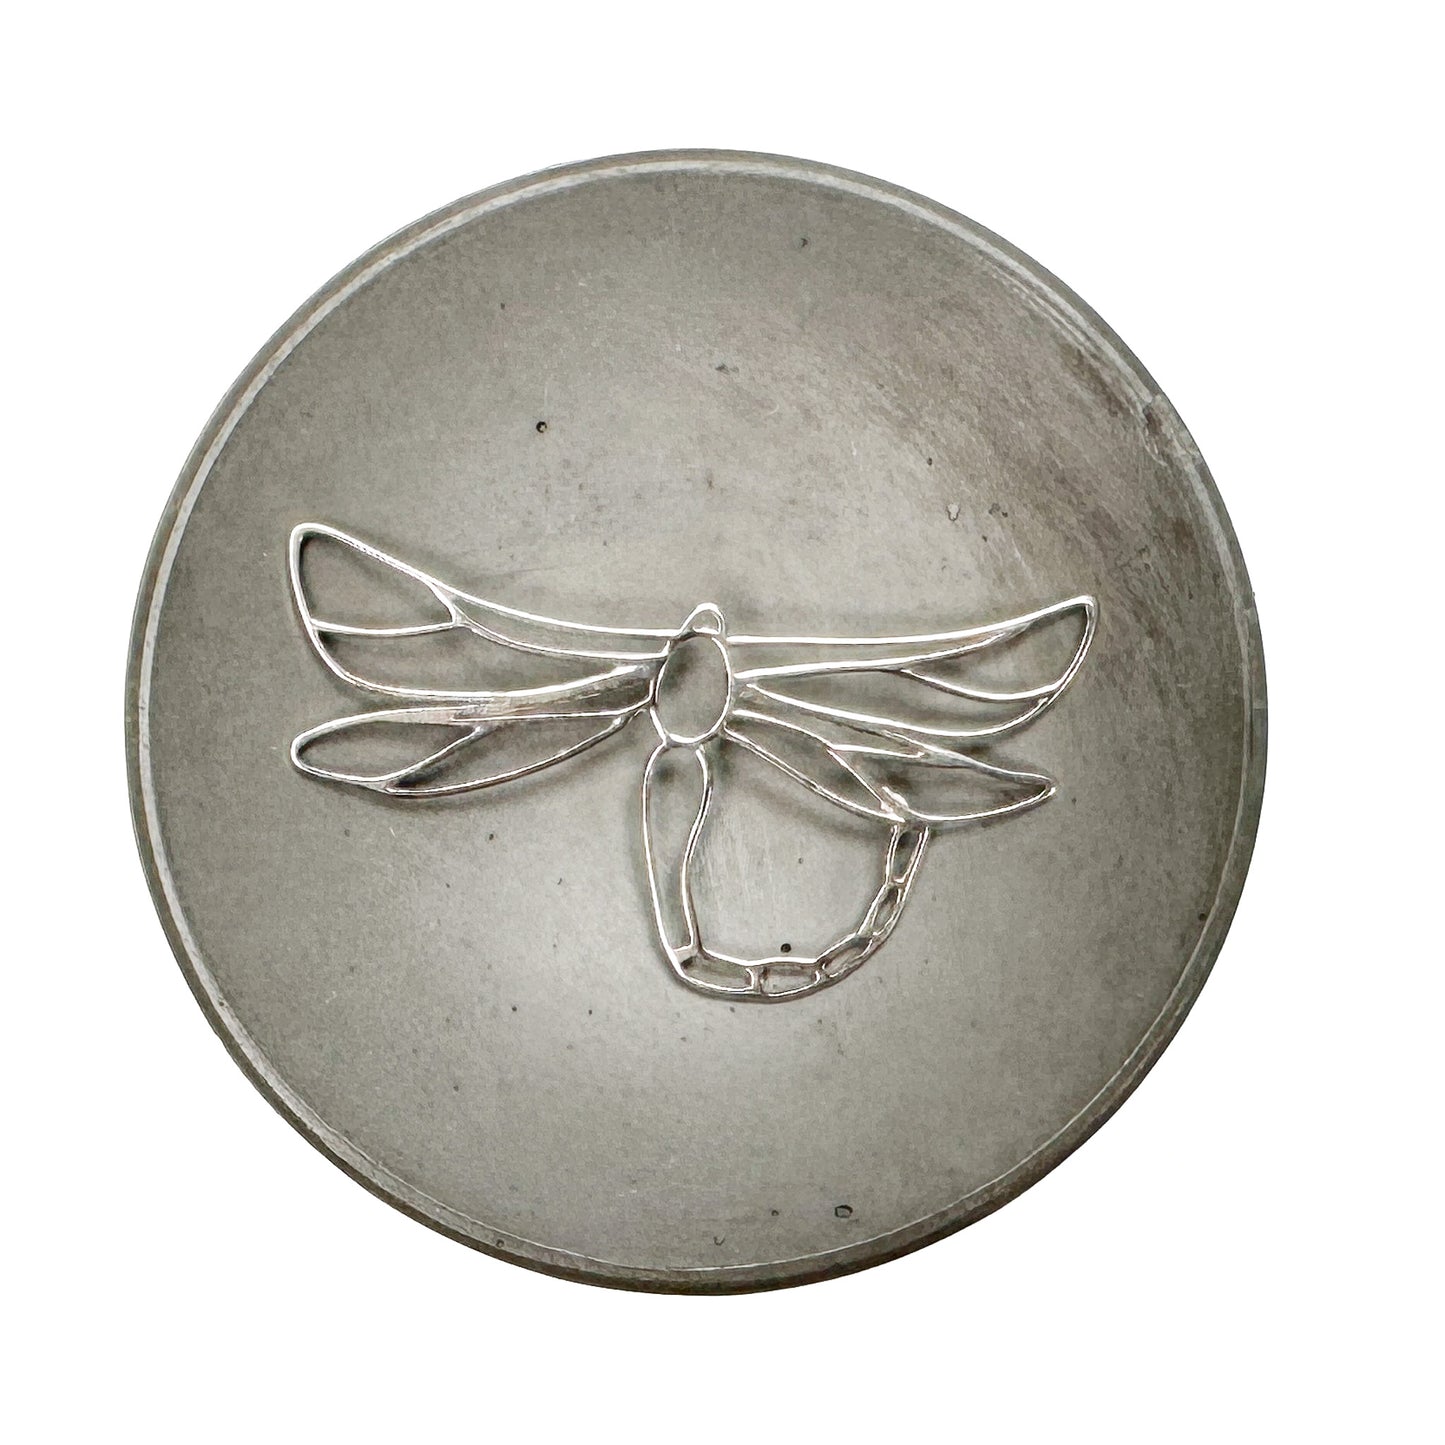 Large Dragonfly Charm (Sterling Silver) - 1 pc.-The Bead Gallery Honolulu